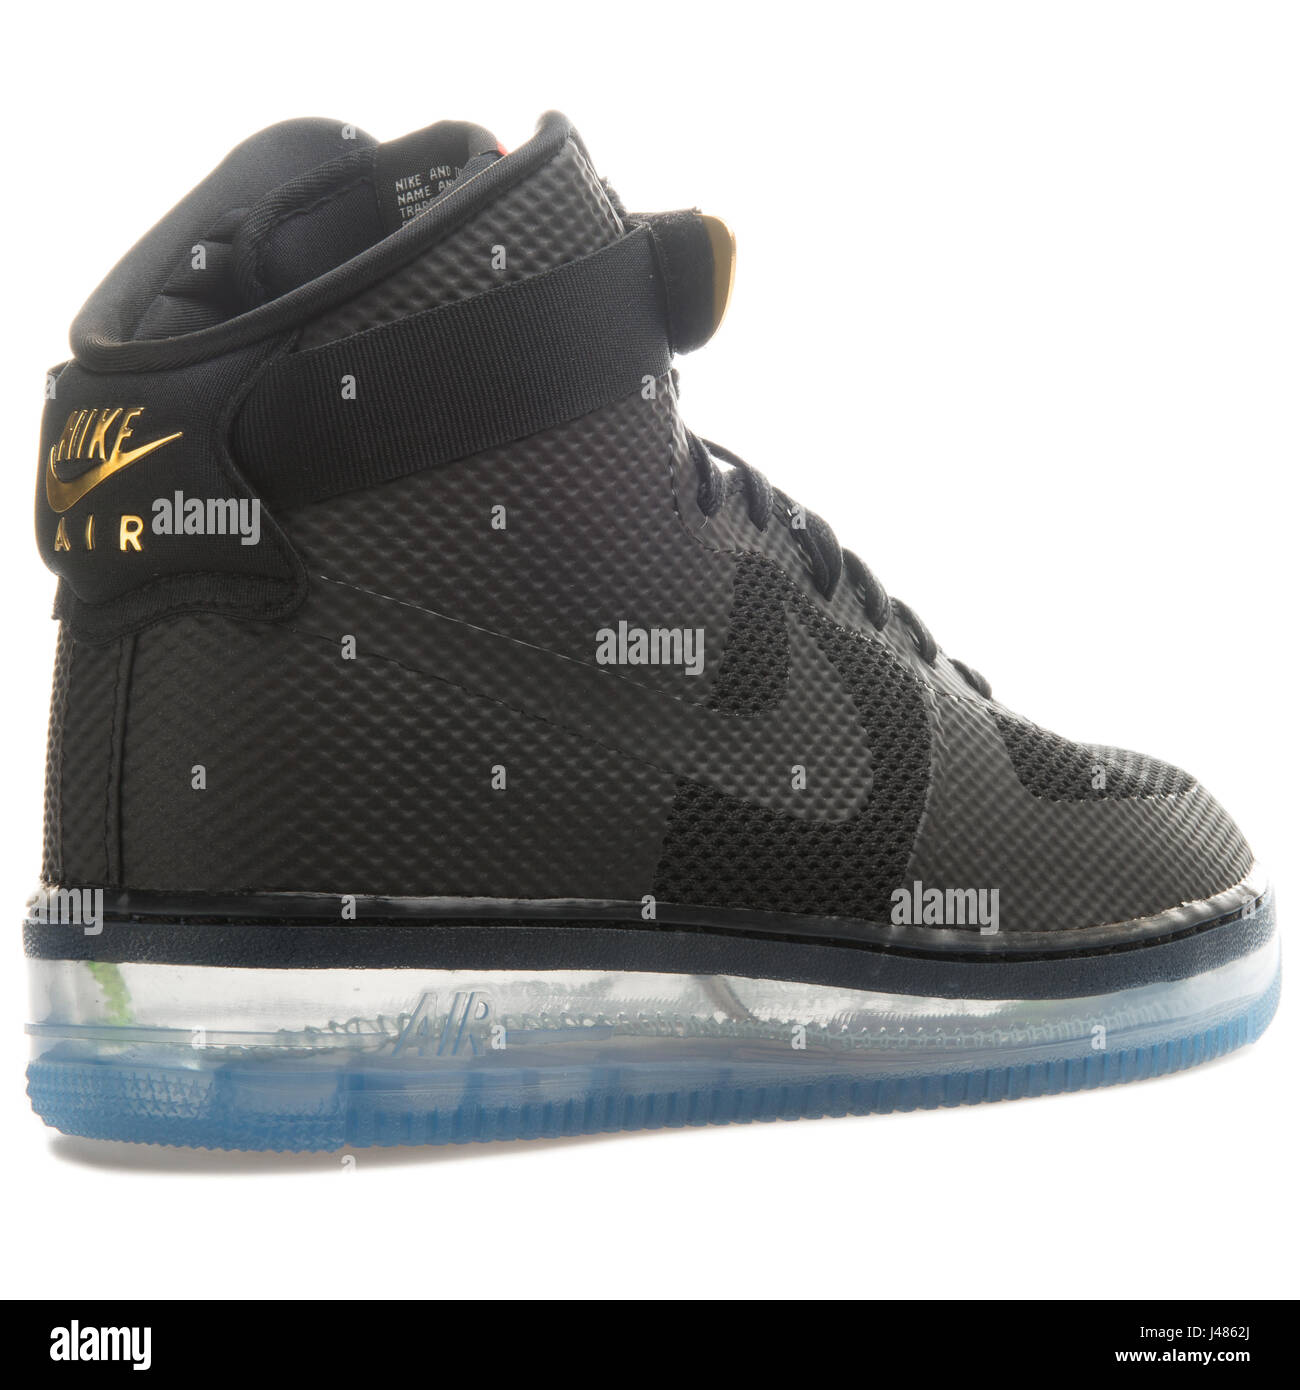 Nike Air Force 1 CMFT LUX - 748280-001 Stock Photo - Alamy